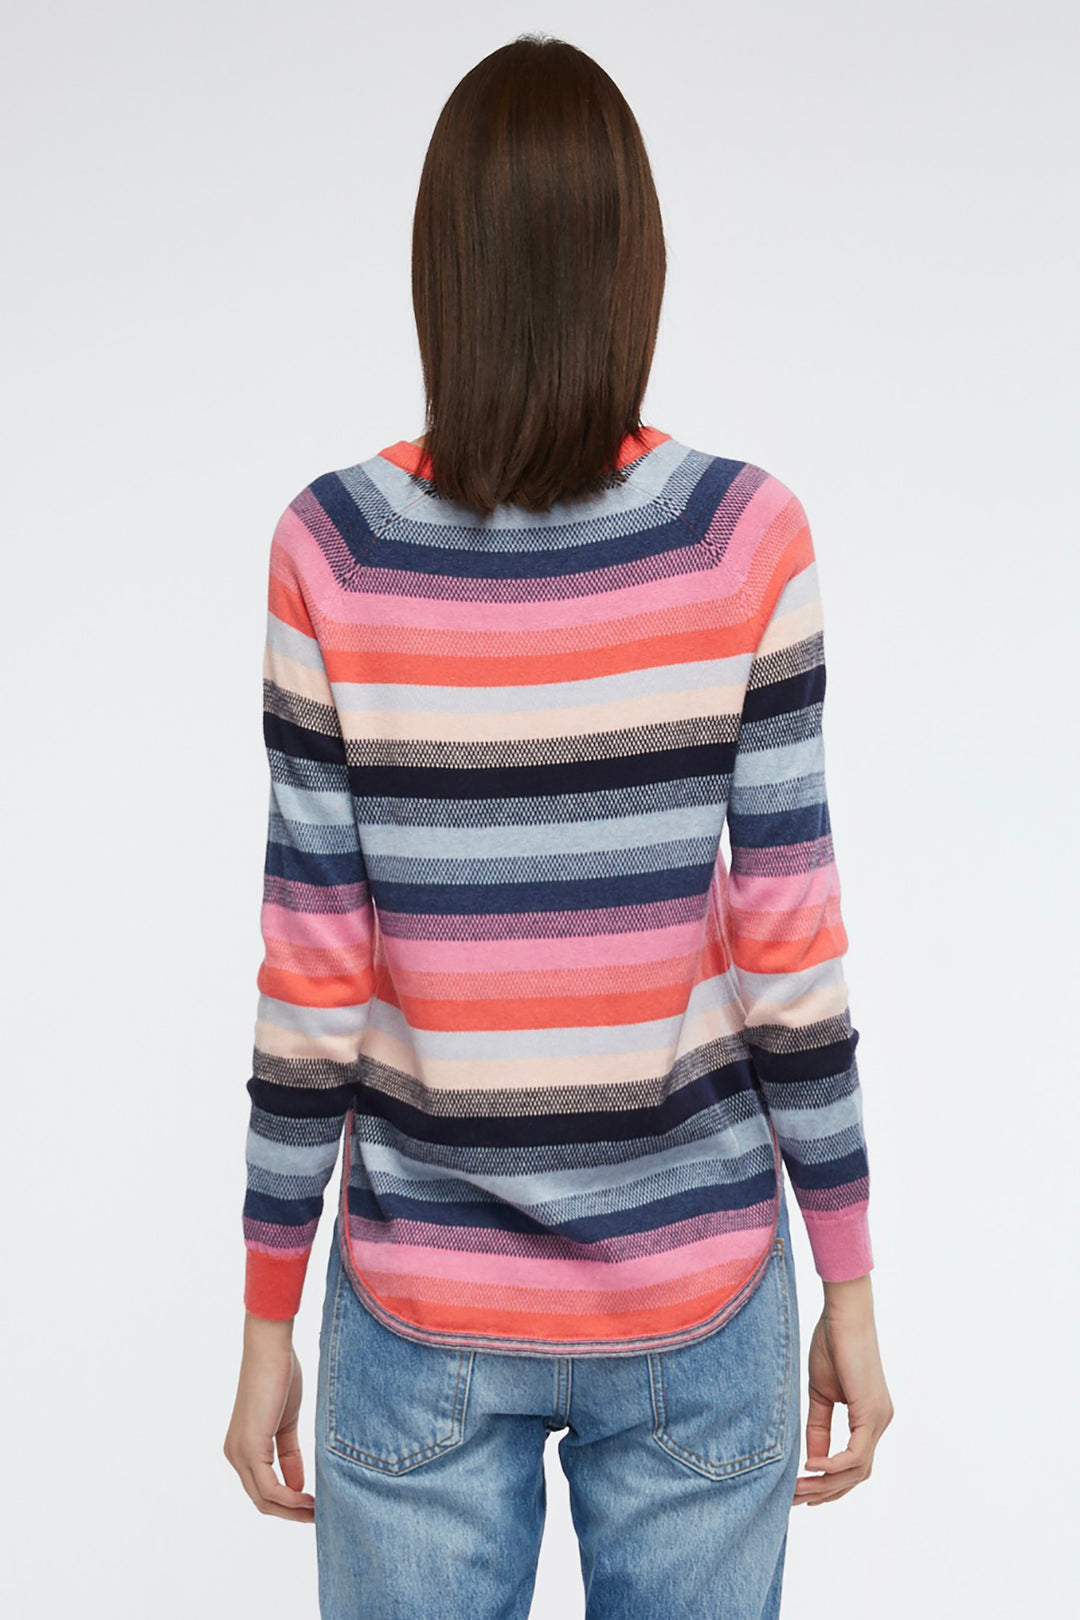 colour splice jumper in dubarry by Zacket & plover back view